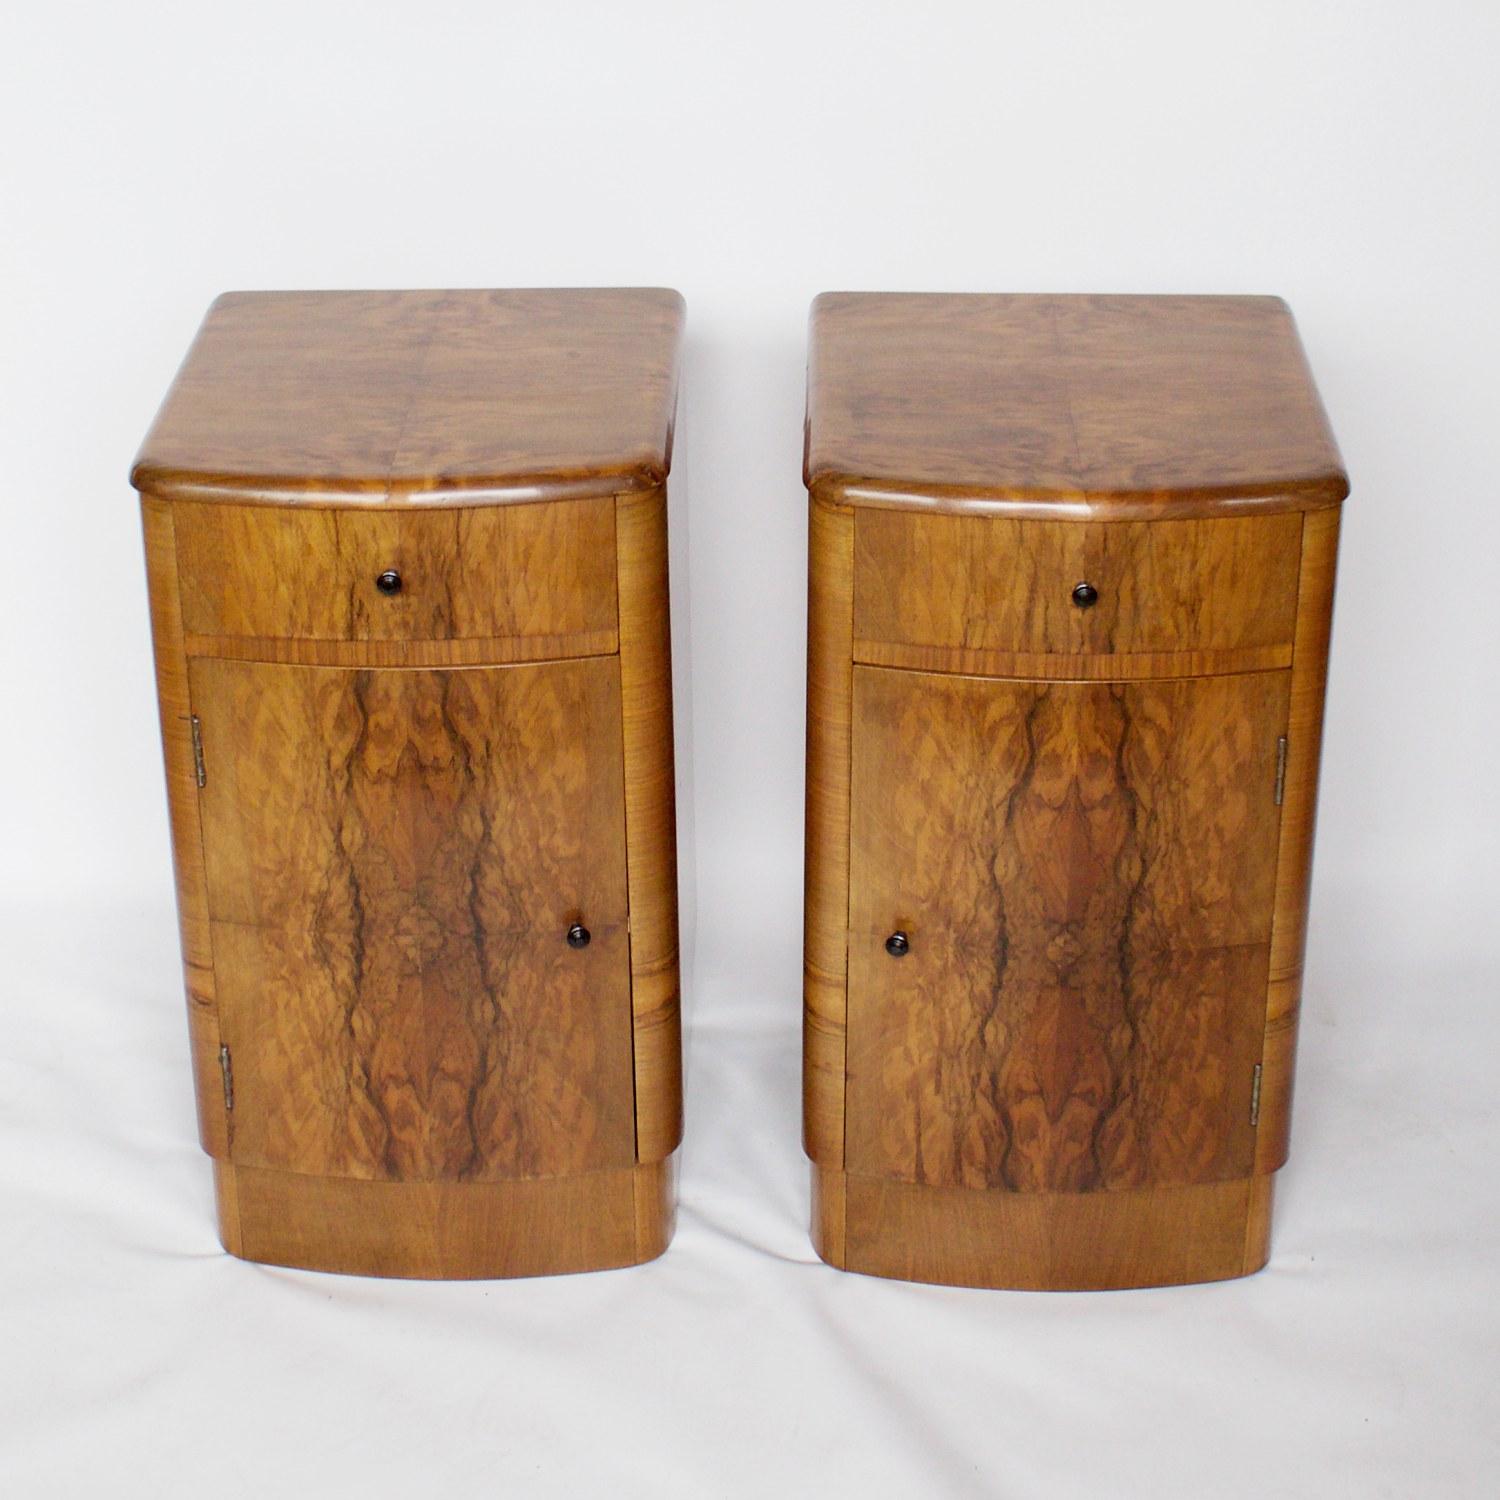 A pair of Art Deco bedside cabinets. Walnut veneered with round black bakelite handles. Integral double shelved cupboard with single drawer above. 

Dimensions: H 65cm W 37cm D 40cm 

Origin: English

Date: circa 1930

Item number: